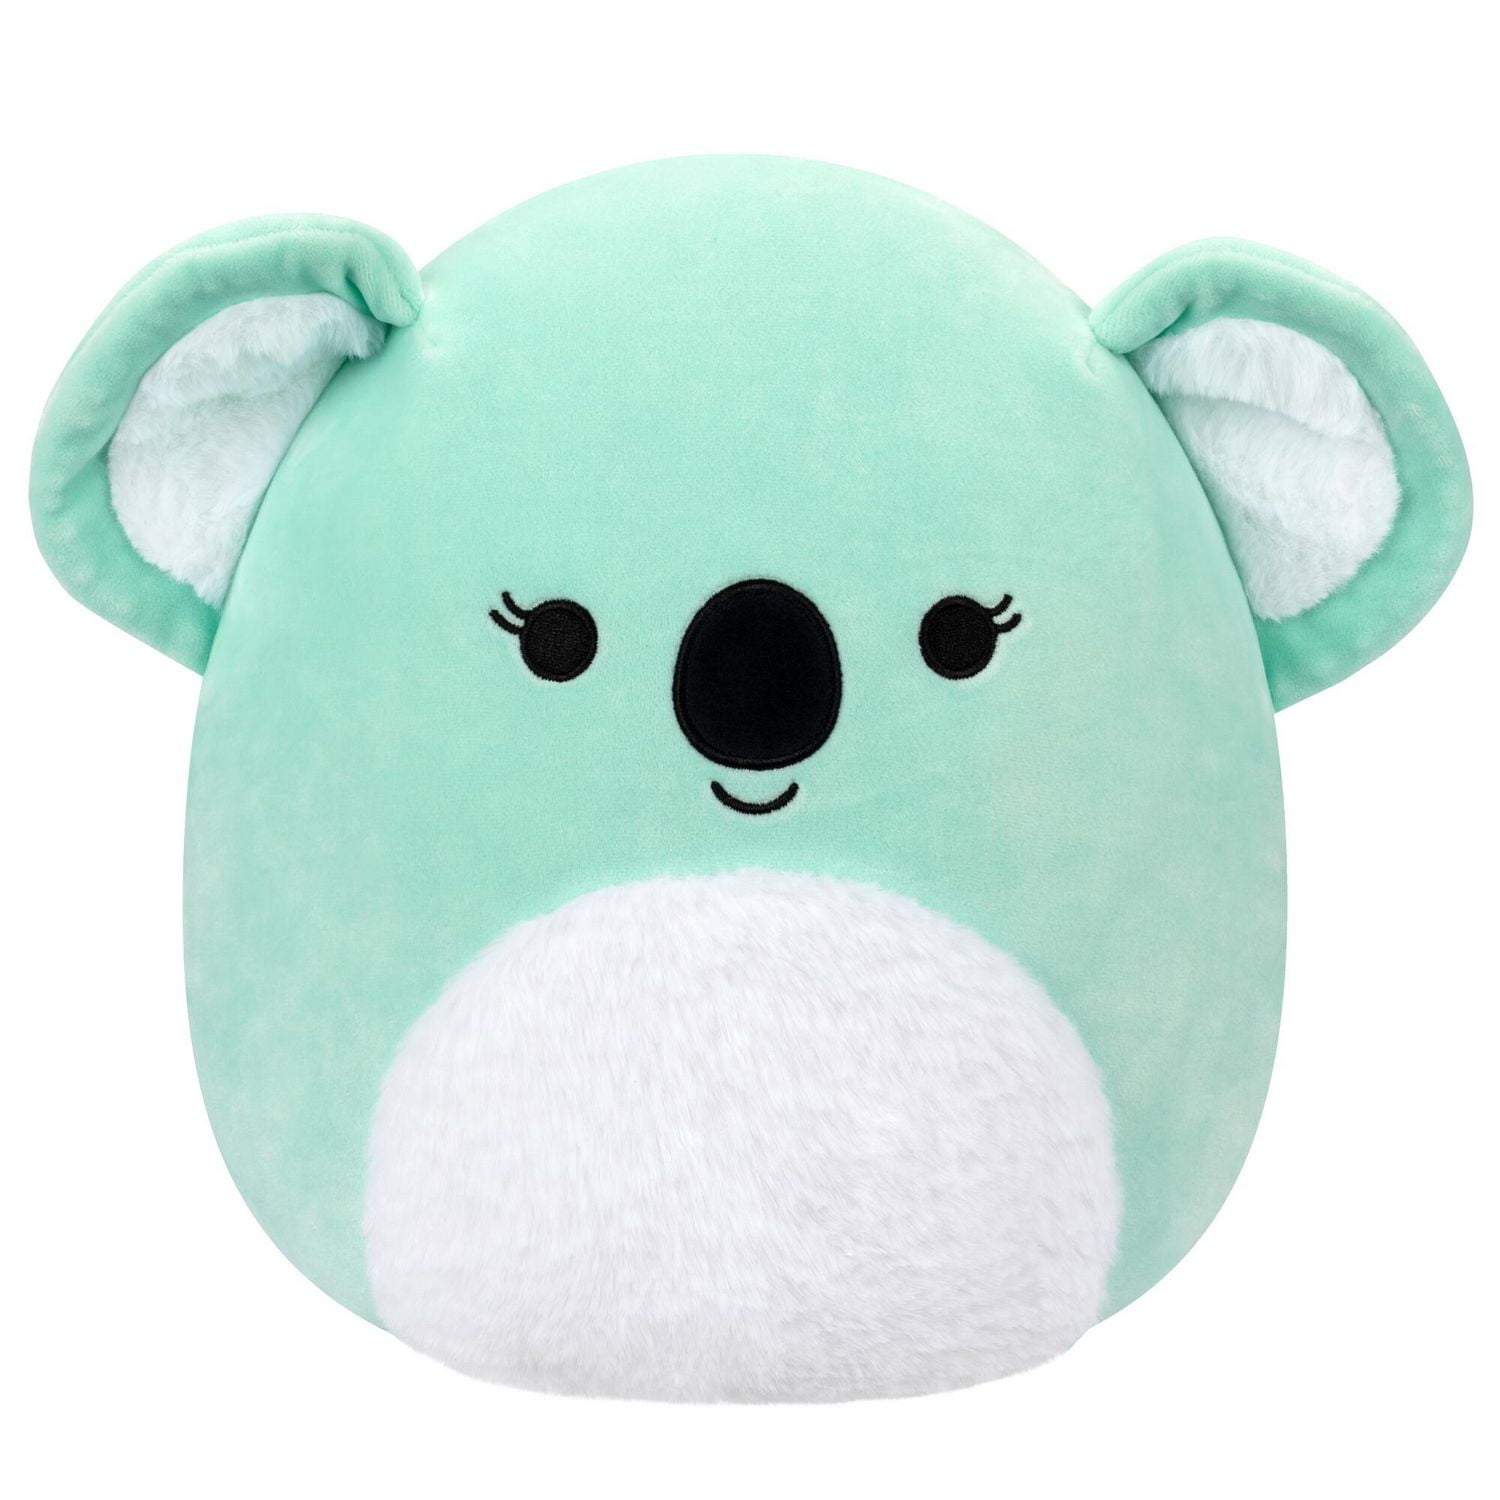 Squishmallows - Coco the Mint Green Koala with White Belly and